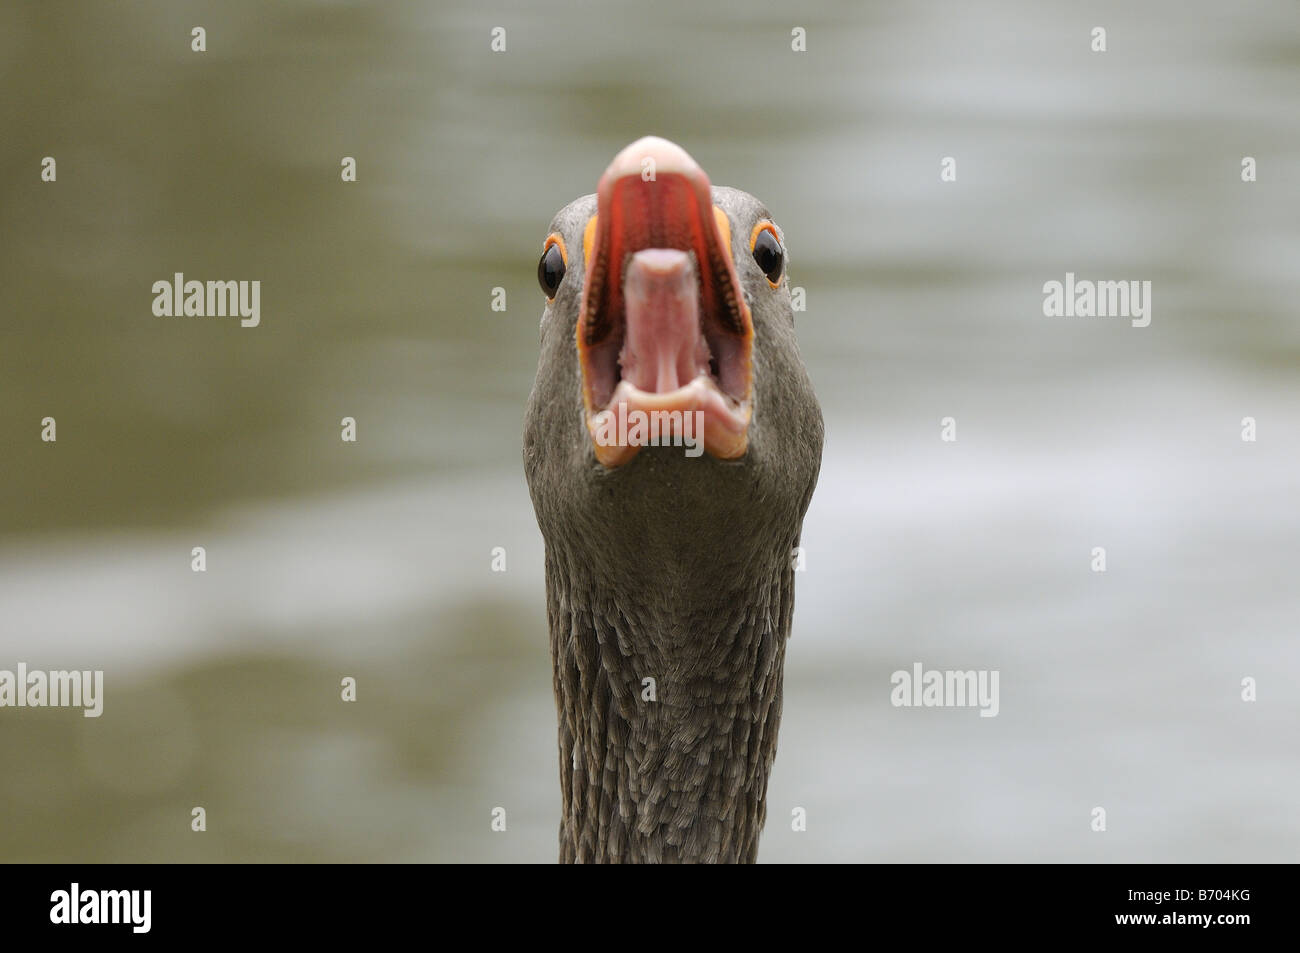 Greylag Goose Anser anser close up of head honking tongue out Oxfordshire UK Stock Photo